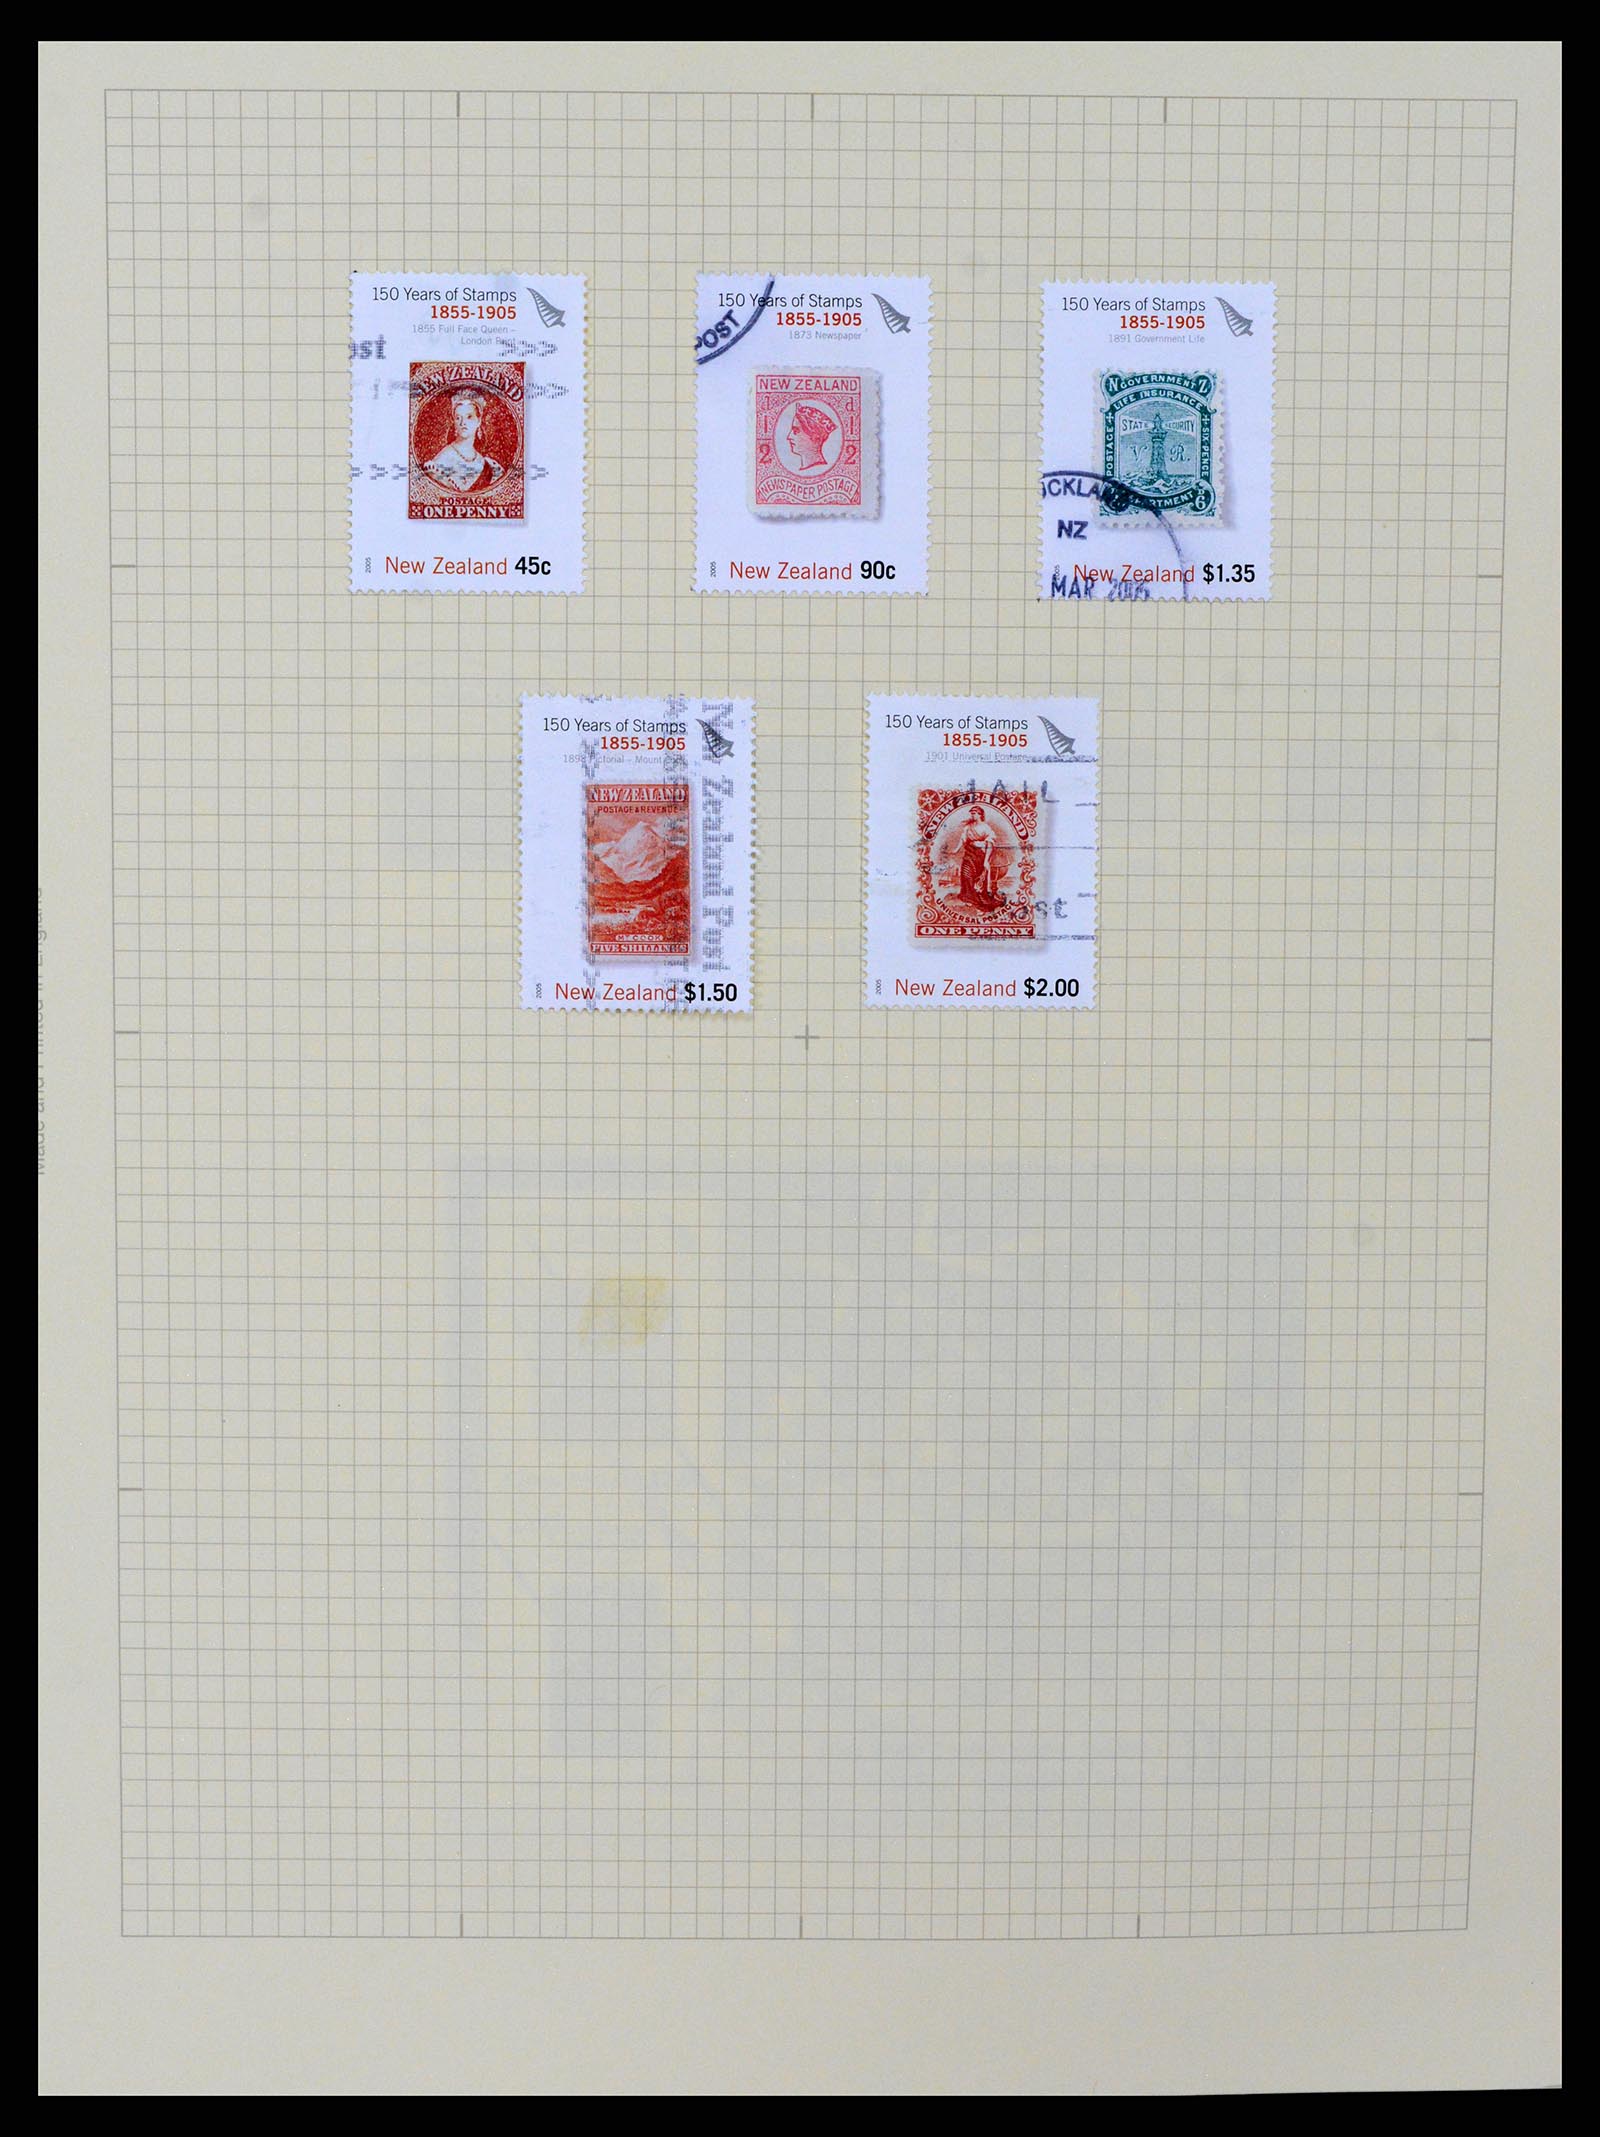 37608 384 - Stamp collection 37608 New Zealand 1874-2014.